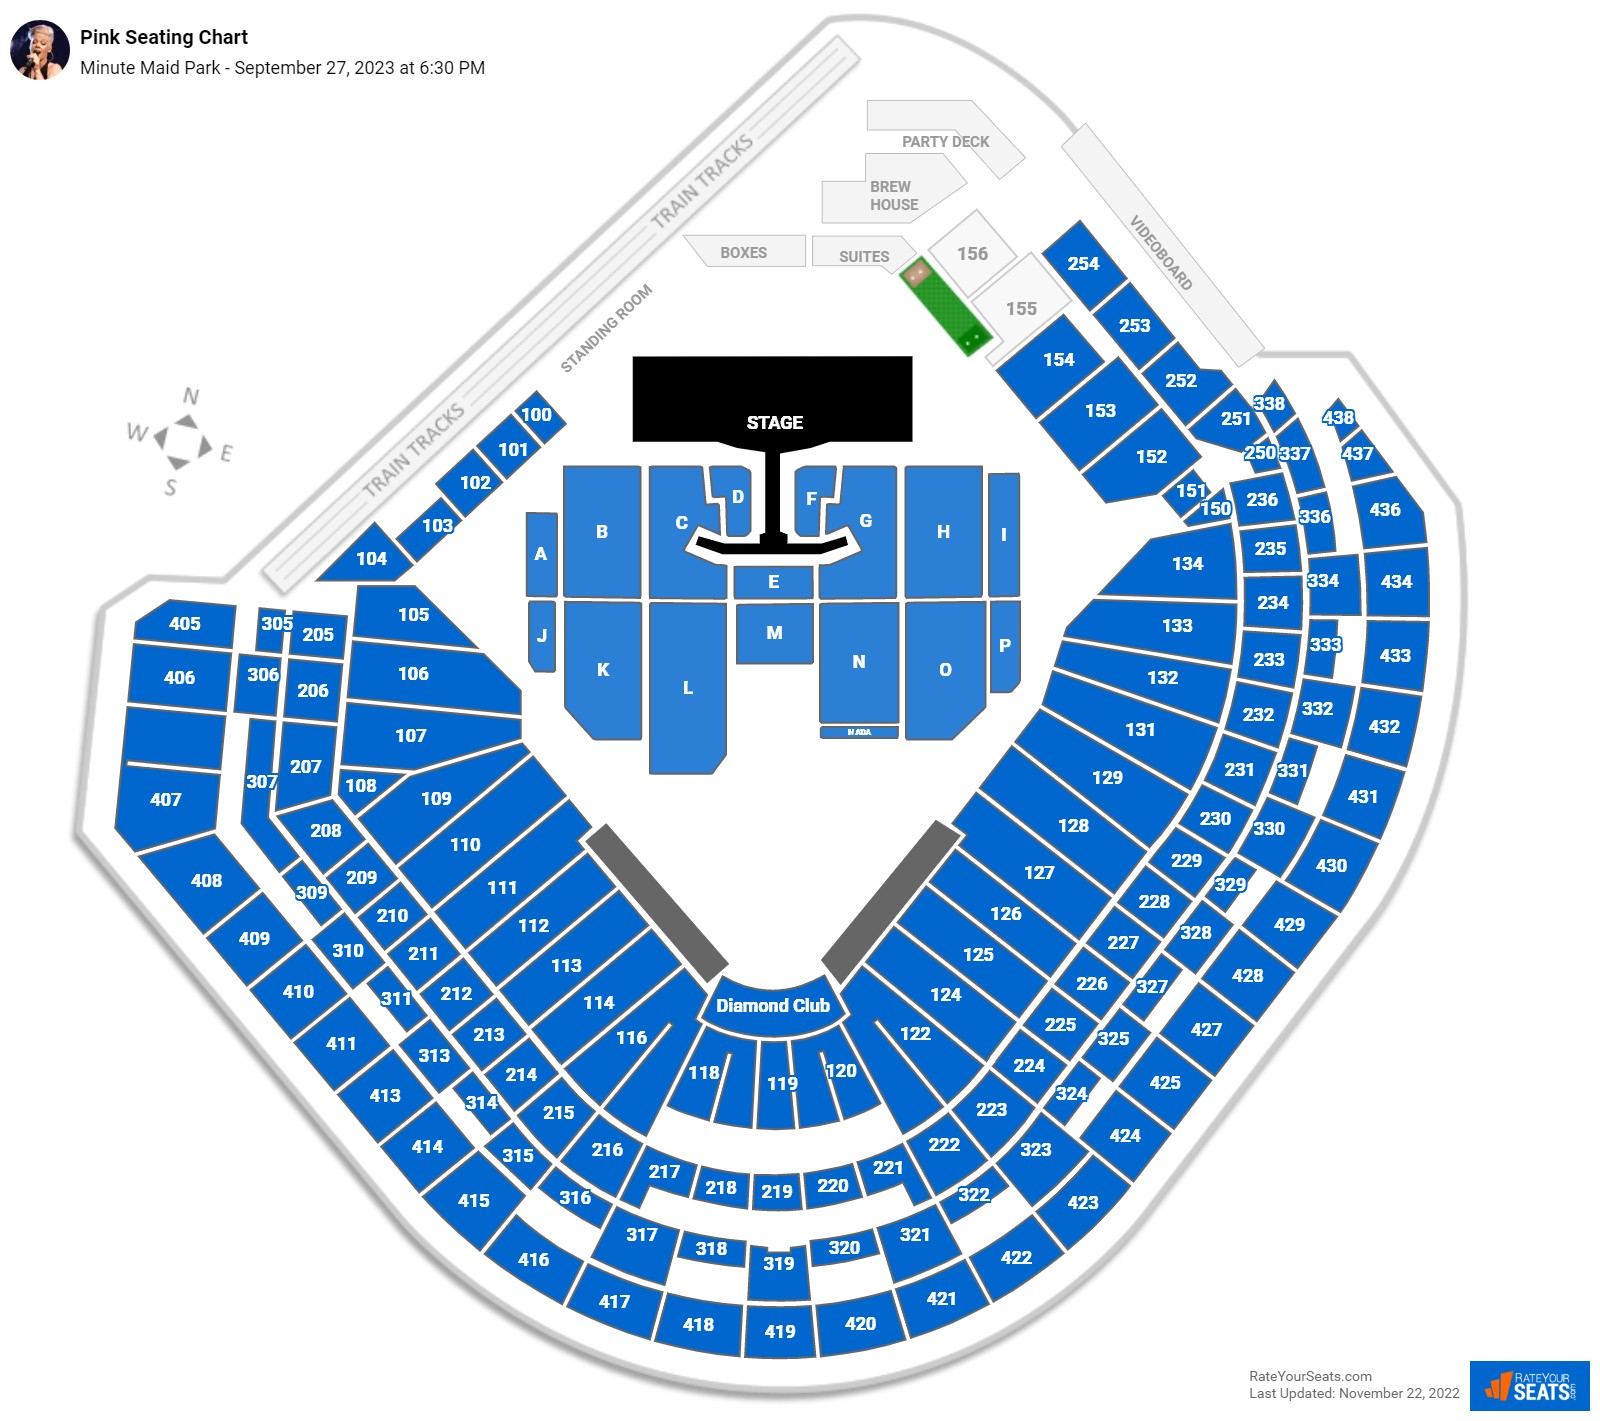 Minute Maid Park Concert Seating Chart